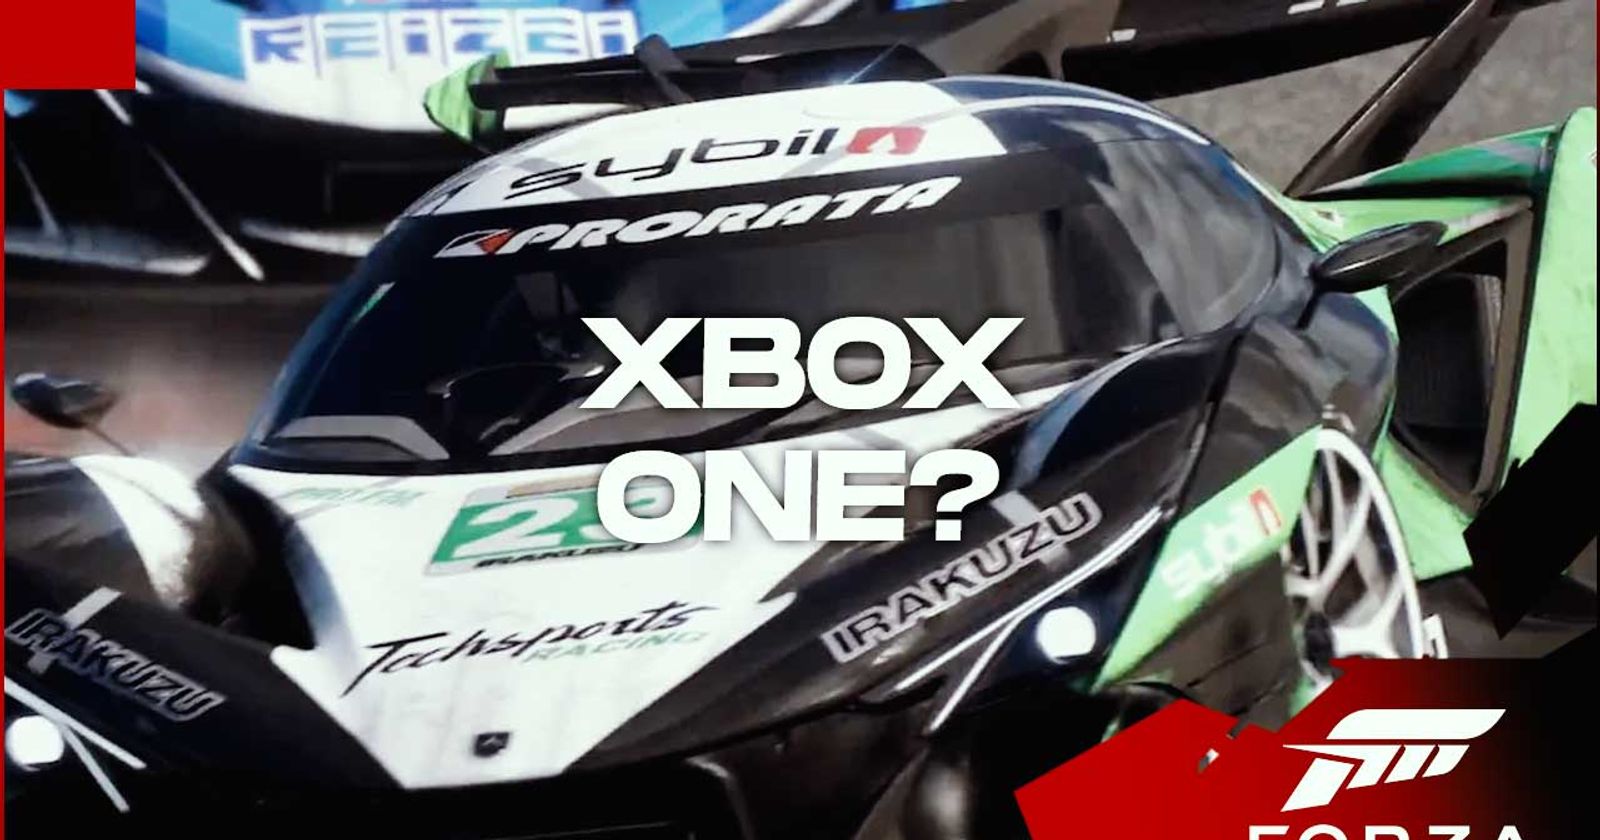 Forza Motorsport on Xbox X comparative to Gran Turismo 7 on Xbox 5 versus  Playstation 5 - Game News 24